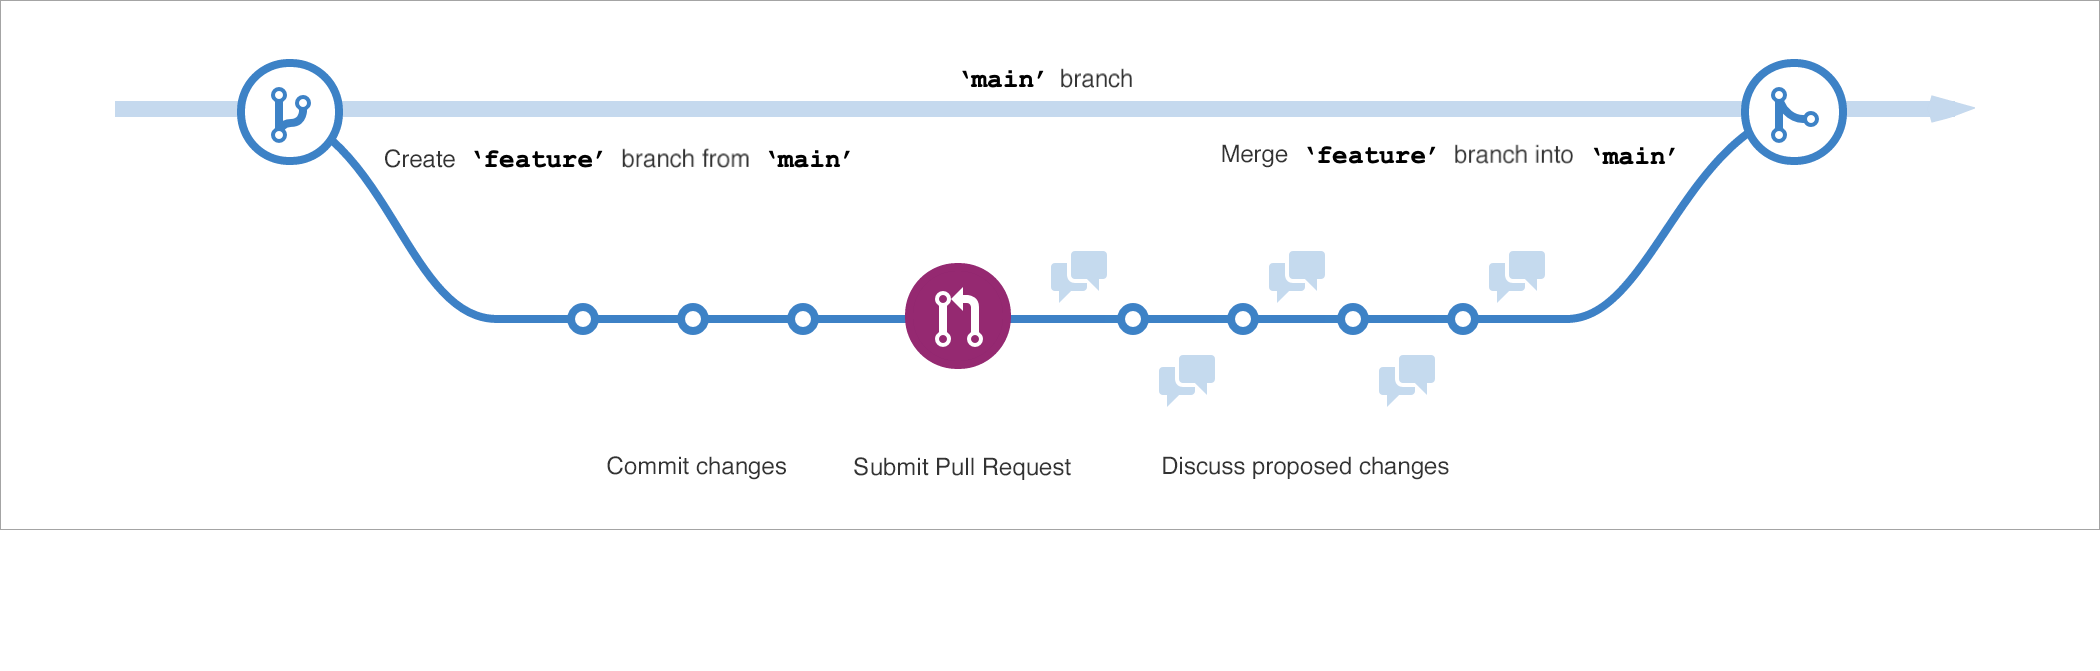 Screenshot showing a visual representation of the GitHub Flow in a linear format that includes a new branch, commits, pull request, and merging the changes back to main in that order.